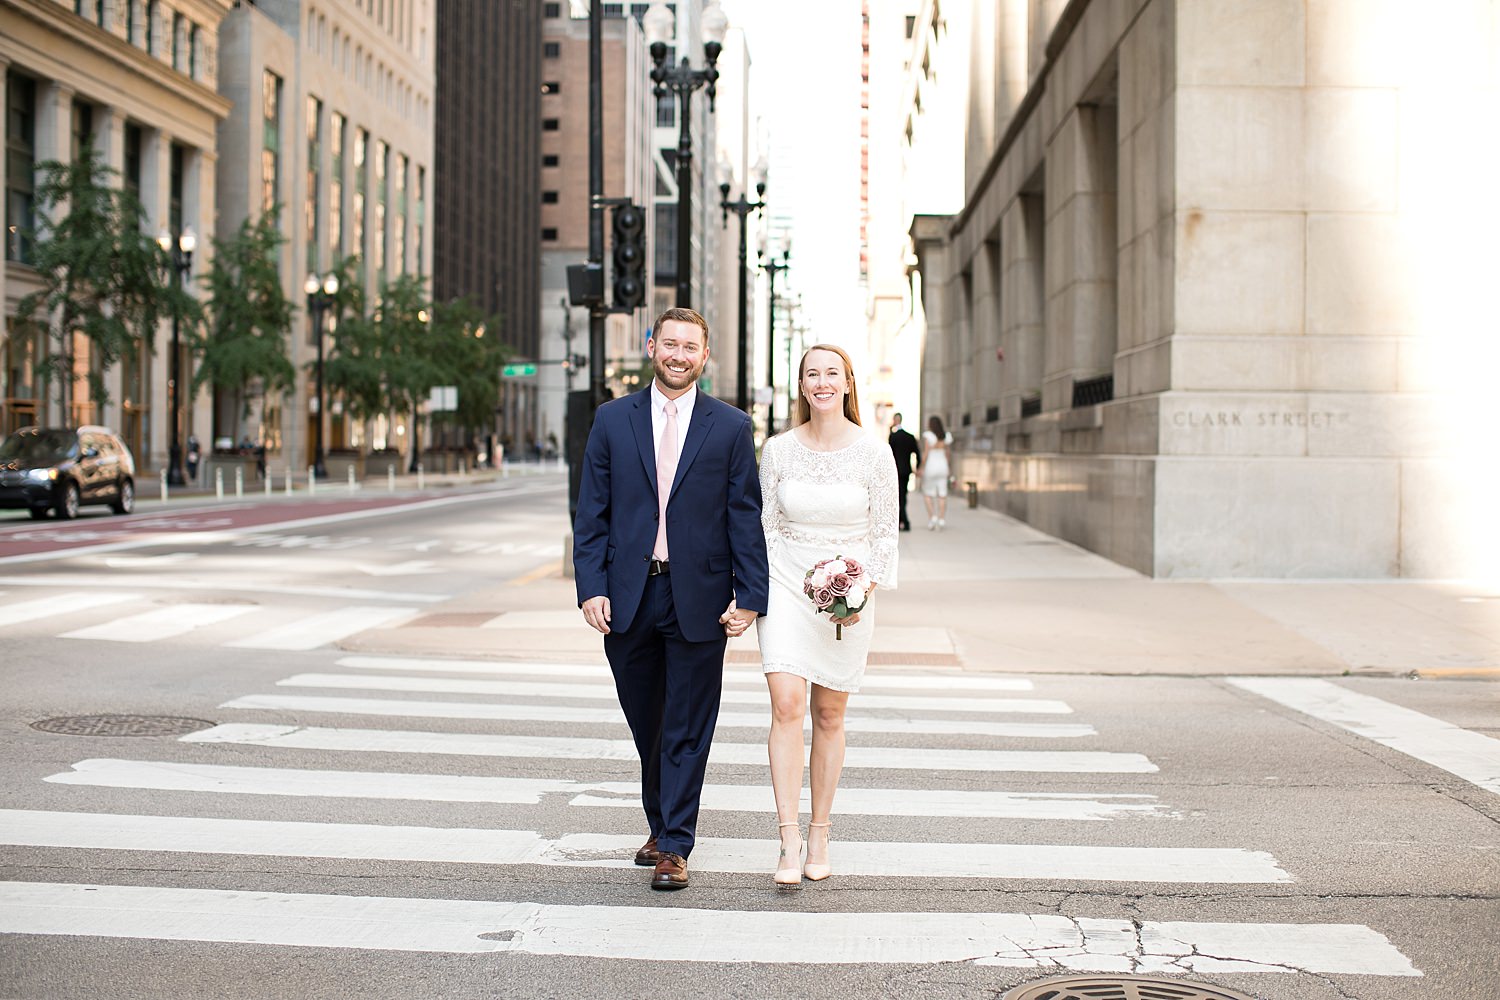 Couple walks down street after their courthouse wedding in Chicago.